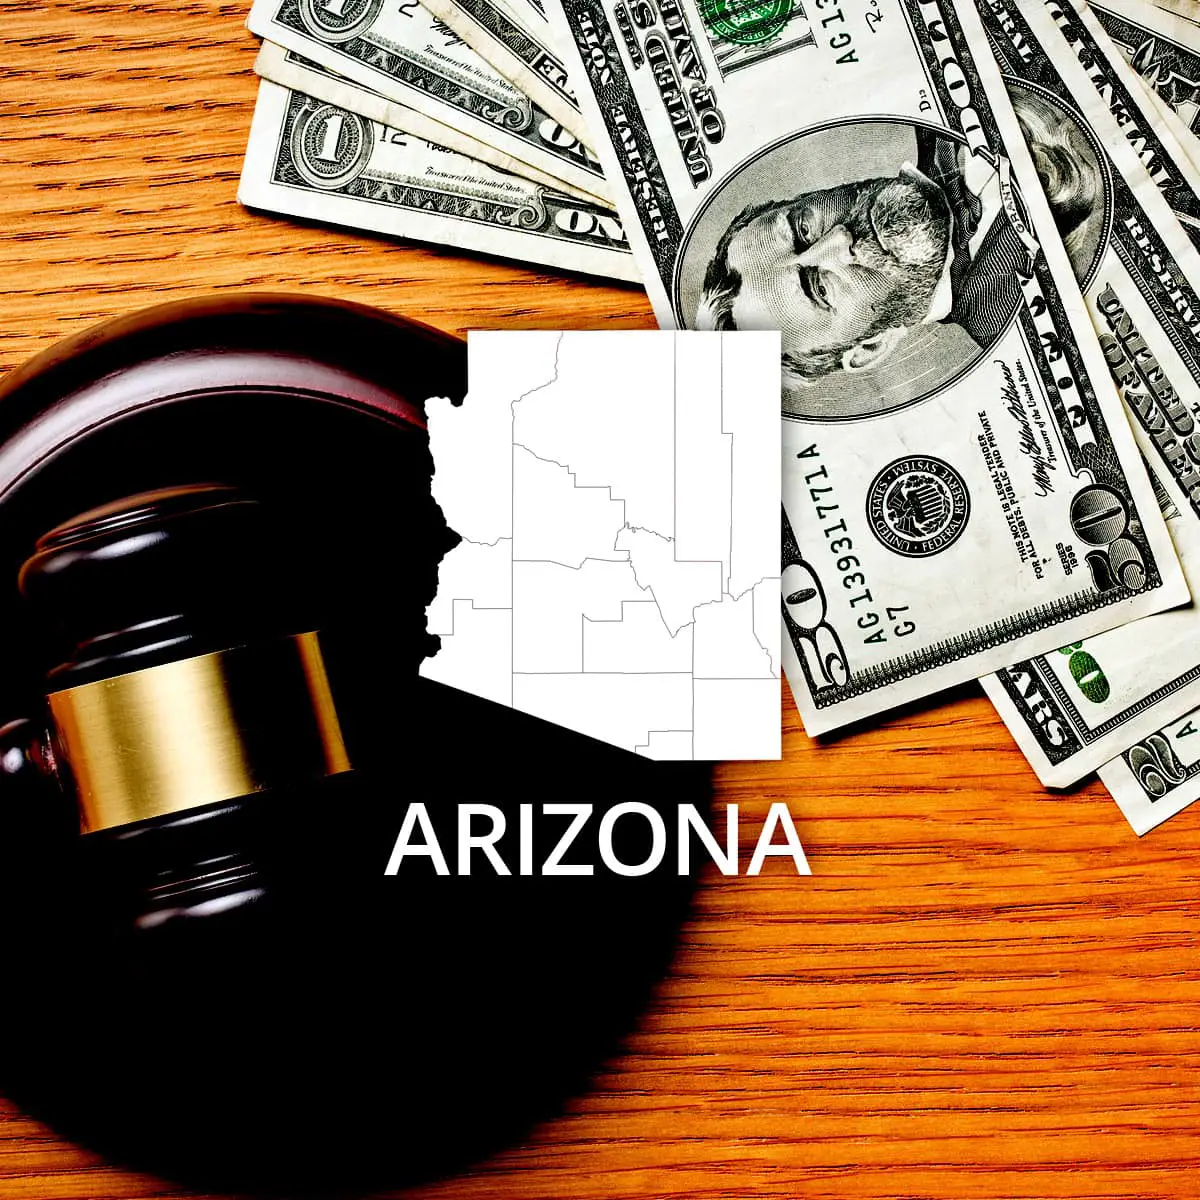 How to File Bankruptcy in Arizona